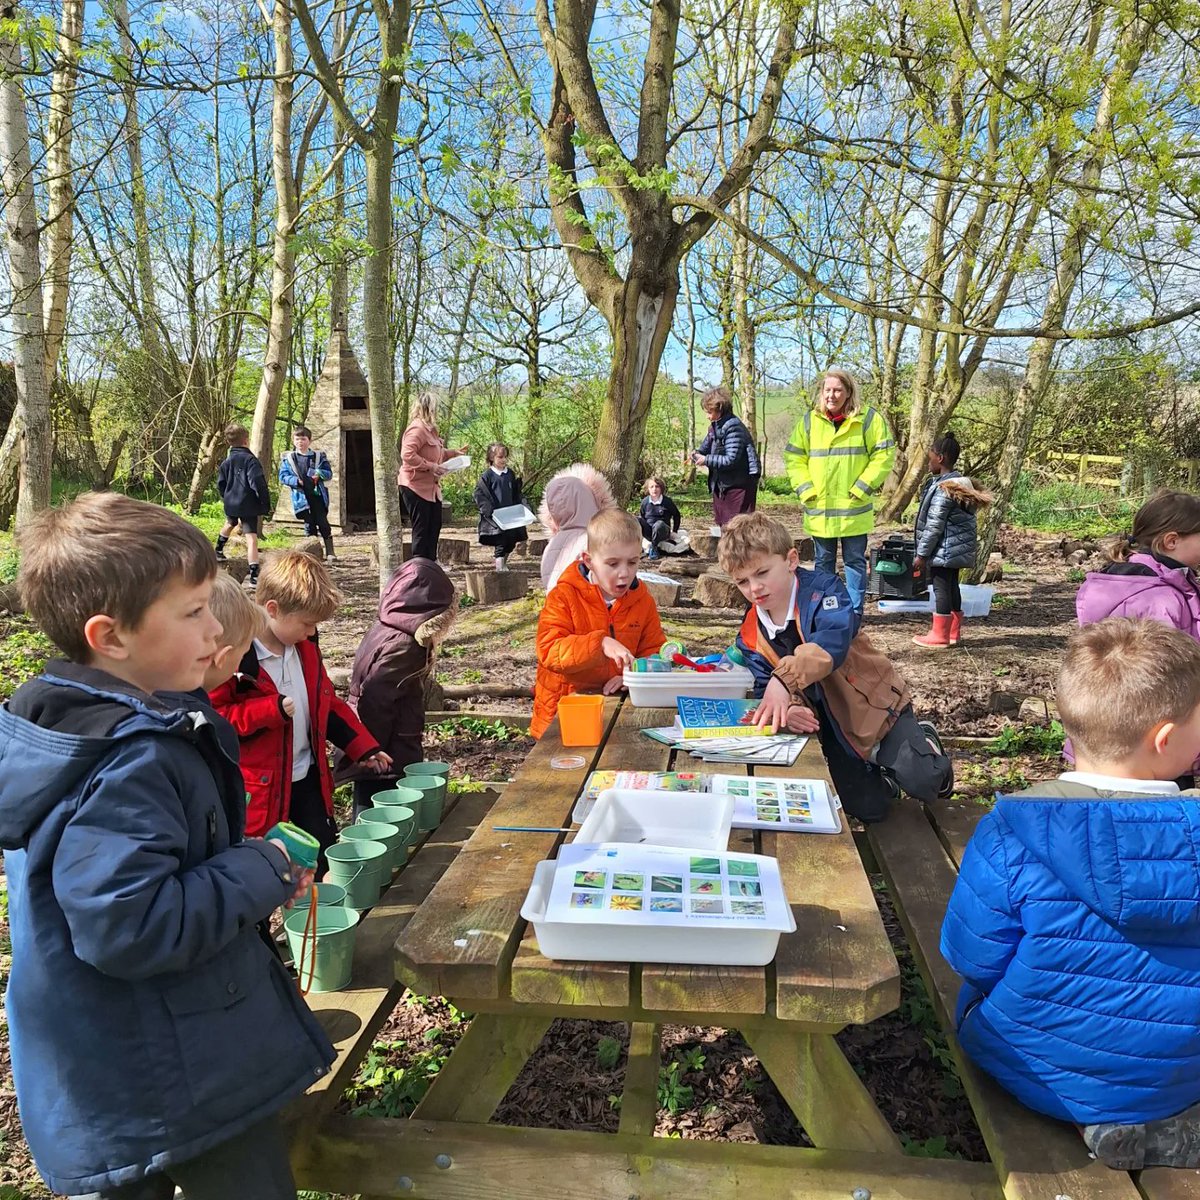 Loved visiting the P1-3 class at Lilliesleaf Primary this afternoon. We enjoyed an invertebrate hunt in the sunshine in their amazing nature garden! Looking forward to welcoming you to Old Melrose next week 🌳 #Destinationtweeduk #heritagelotteryfund #EUWader